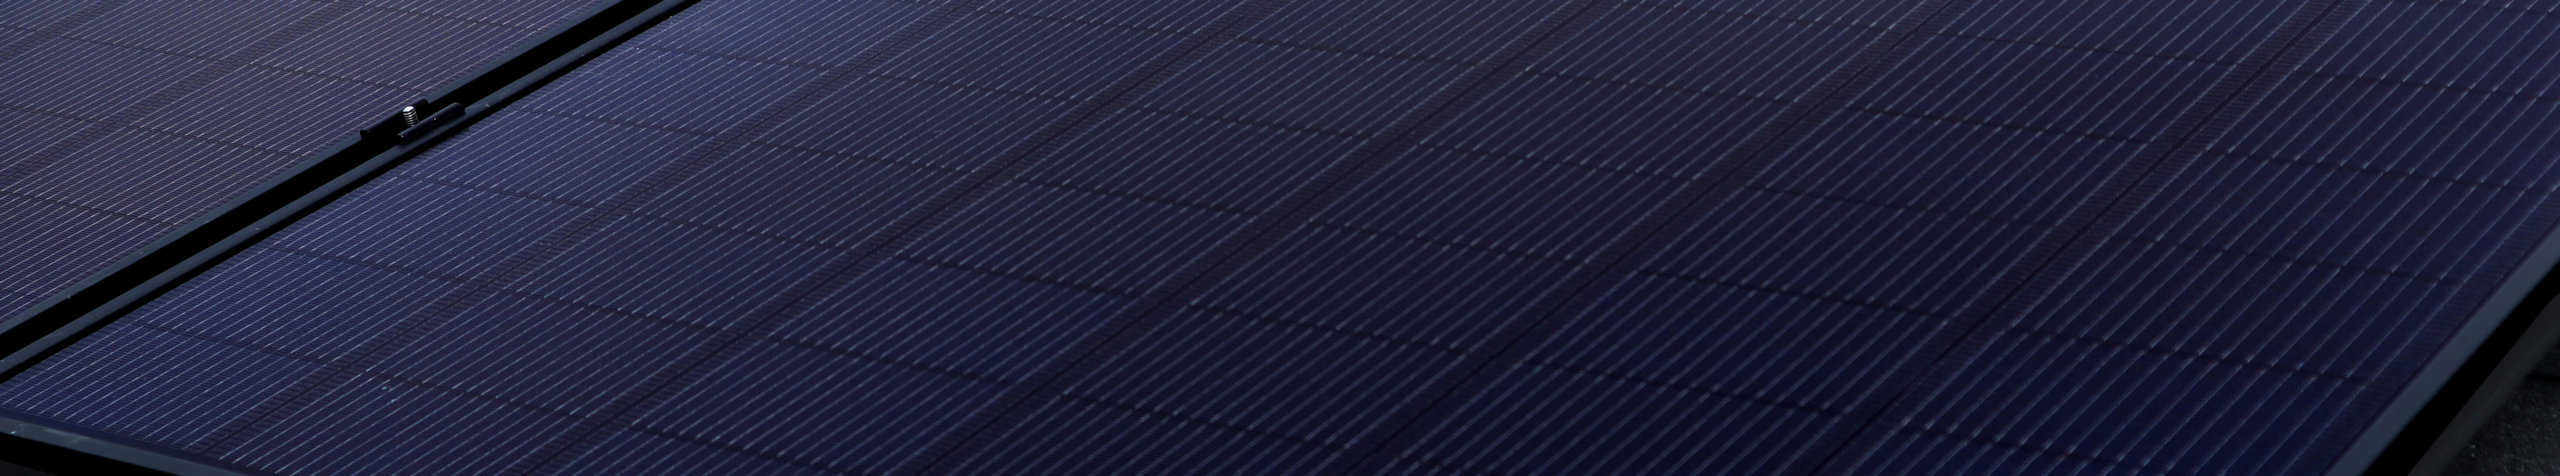 Zoomed in view of solar panel installed on roof, focusing on individual solar cells